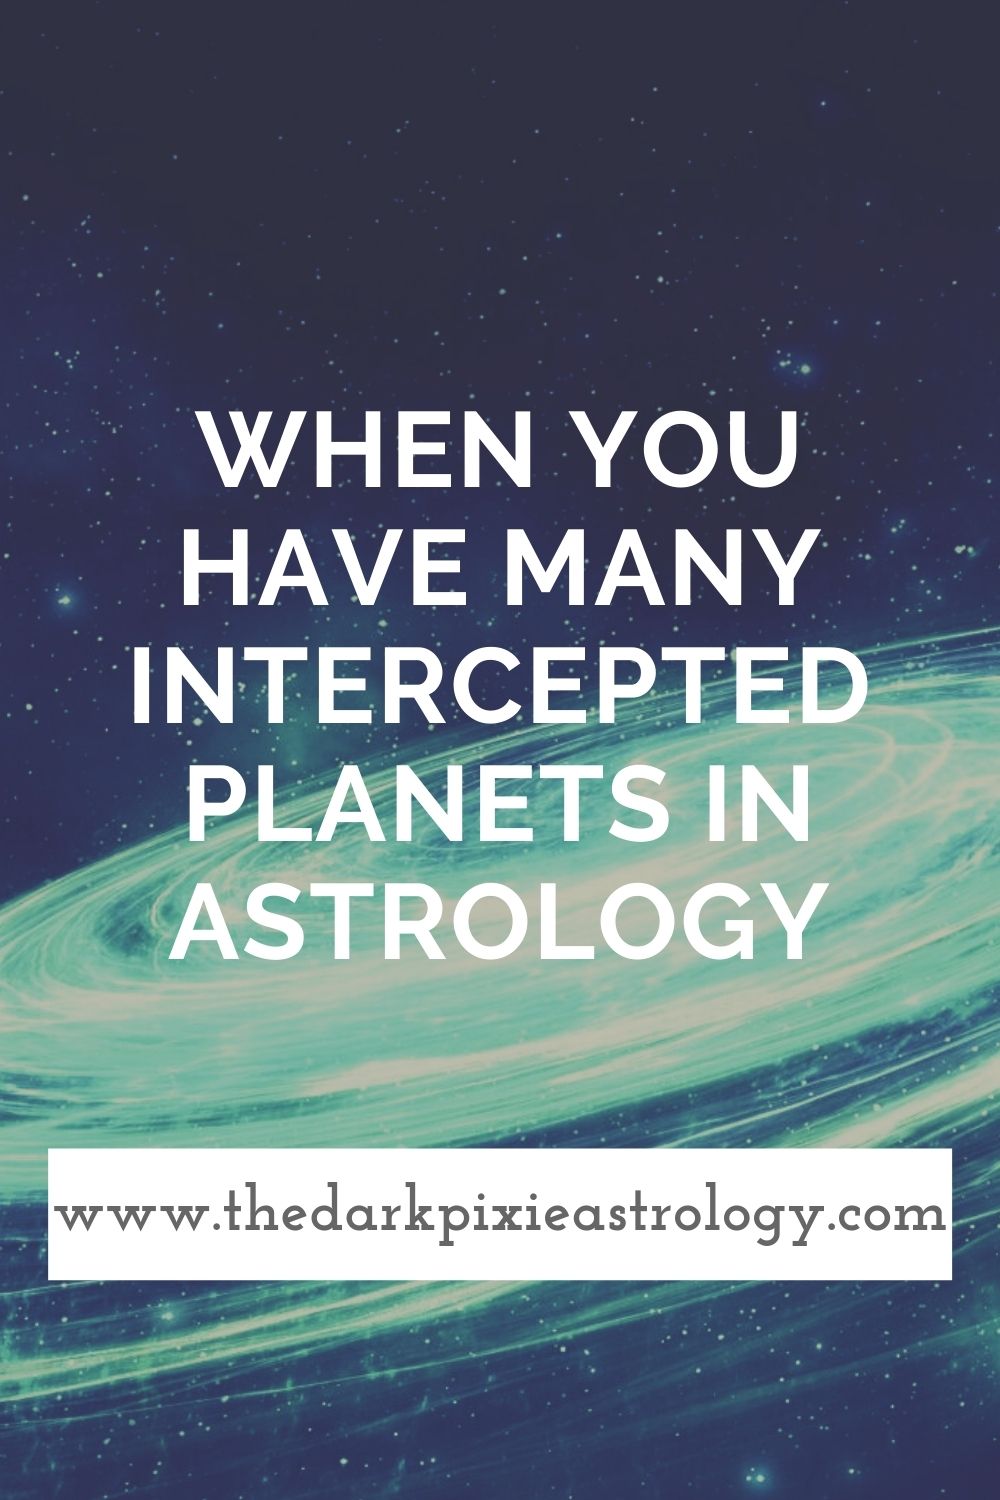 When You Have Many Intercepted Planets in Astrology - The Dark Pixie Astrology